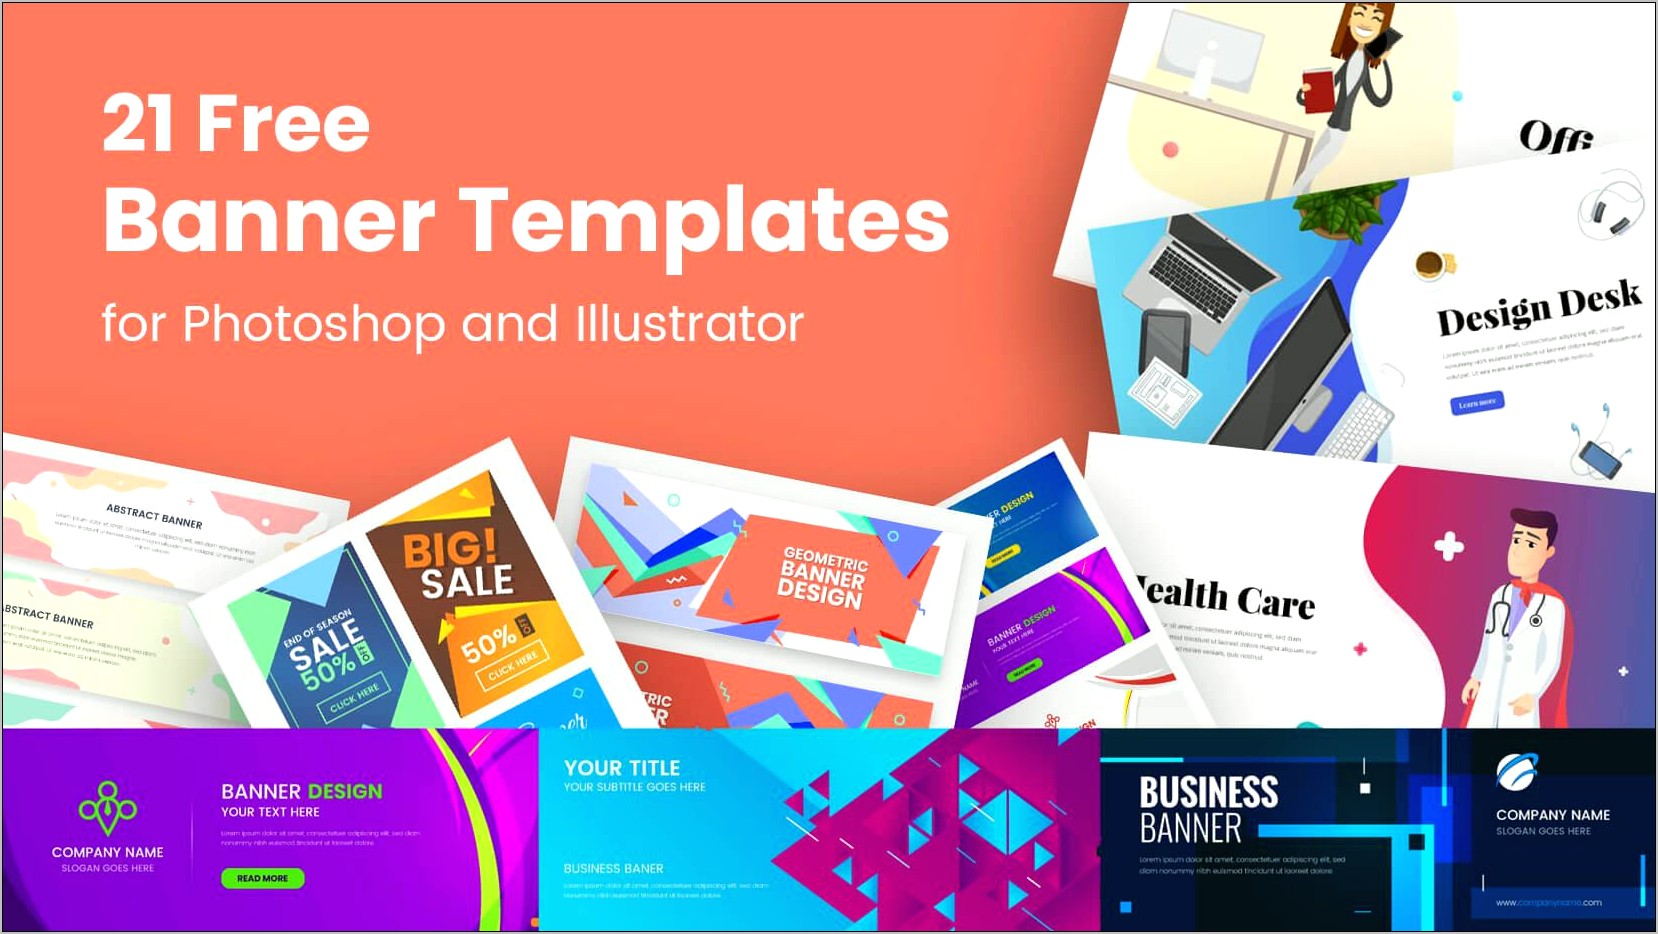 flex-banner-design-templates-free-download-resume-example-gallery